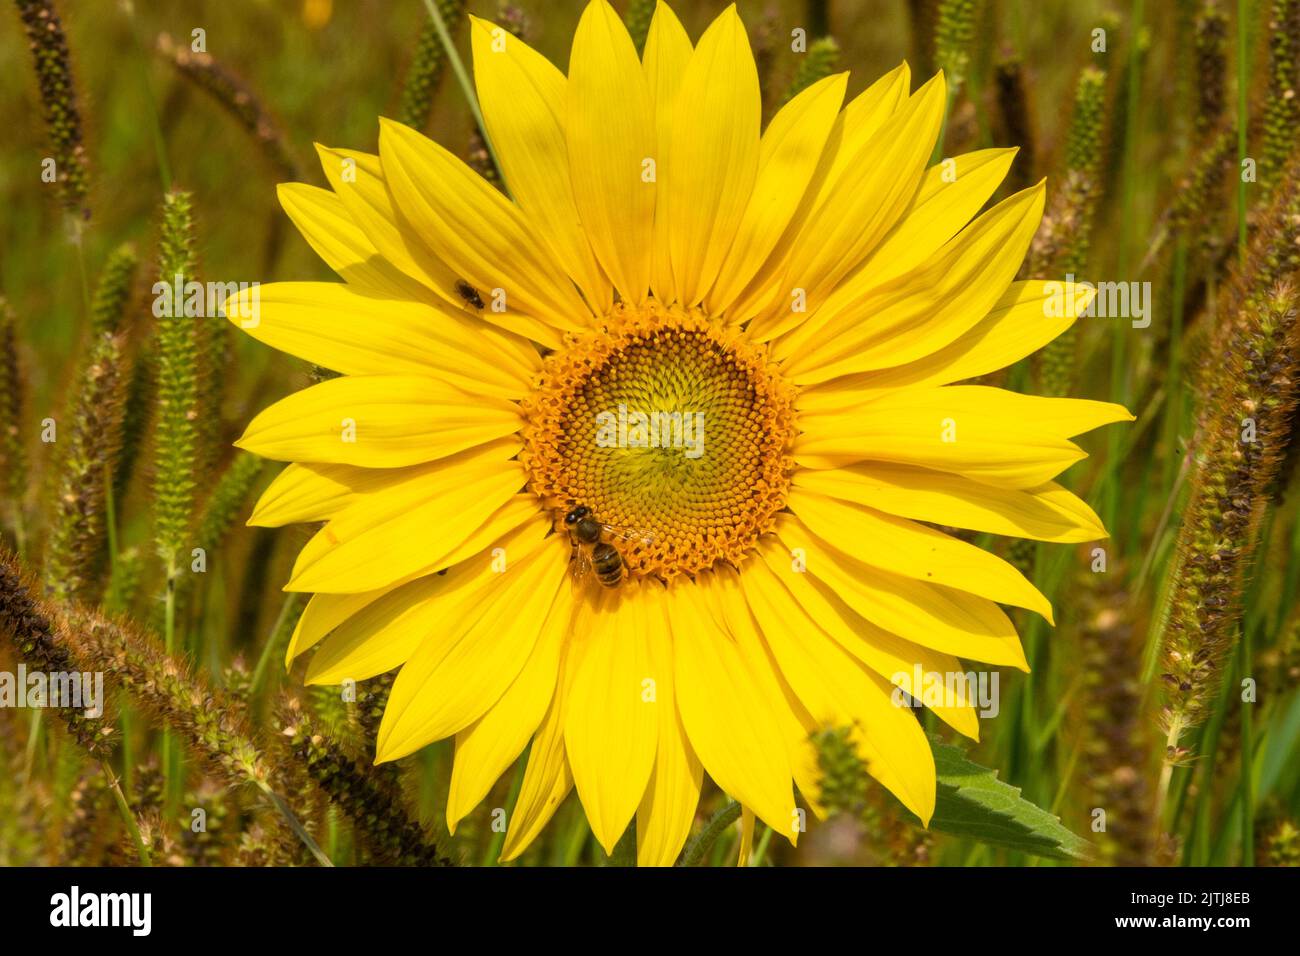 Sunflower in the field of foxtail grass Stock Photo